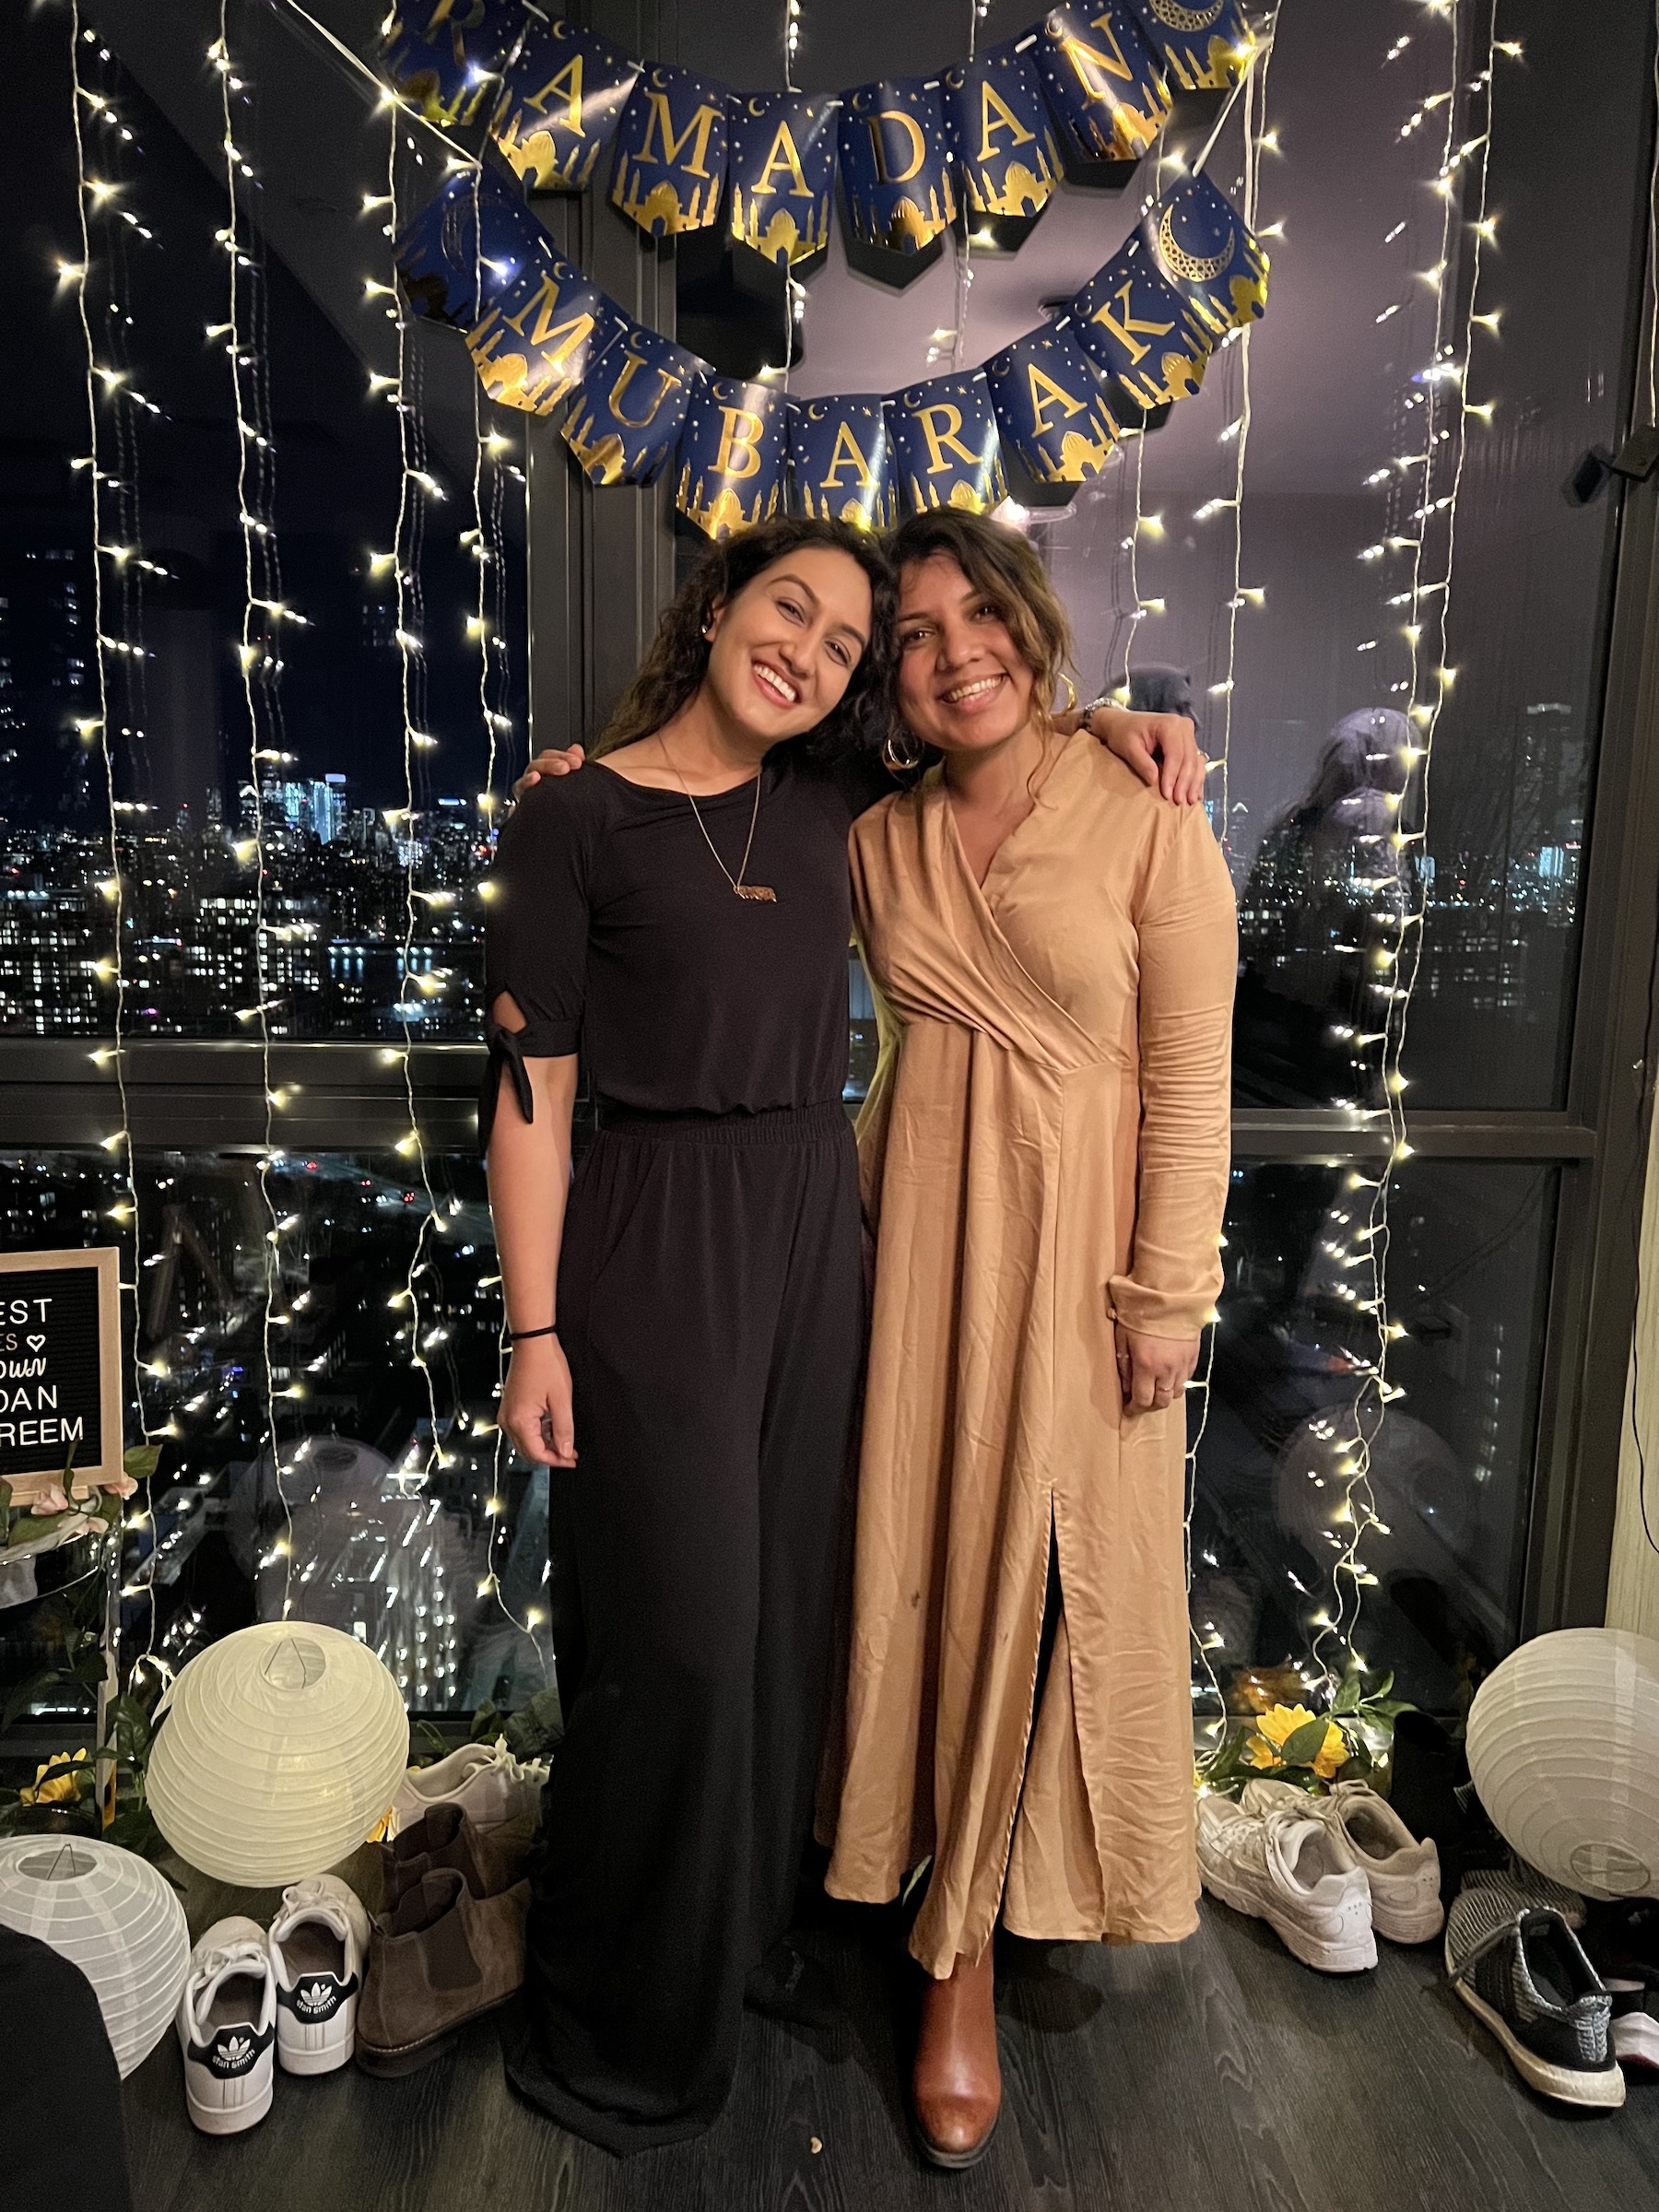 Aniqa Mian (right) with her friend at a 2022 iftar gathering, in which Muslims open their fast, in New York (Aniqa Mian)